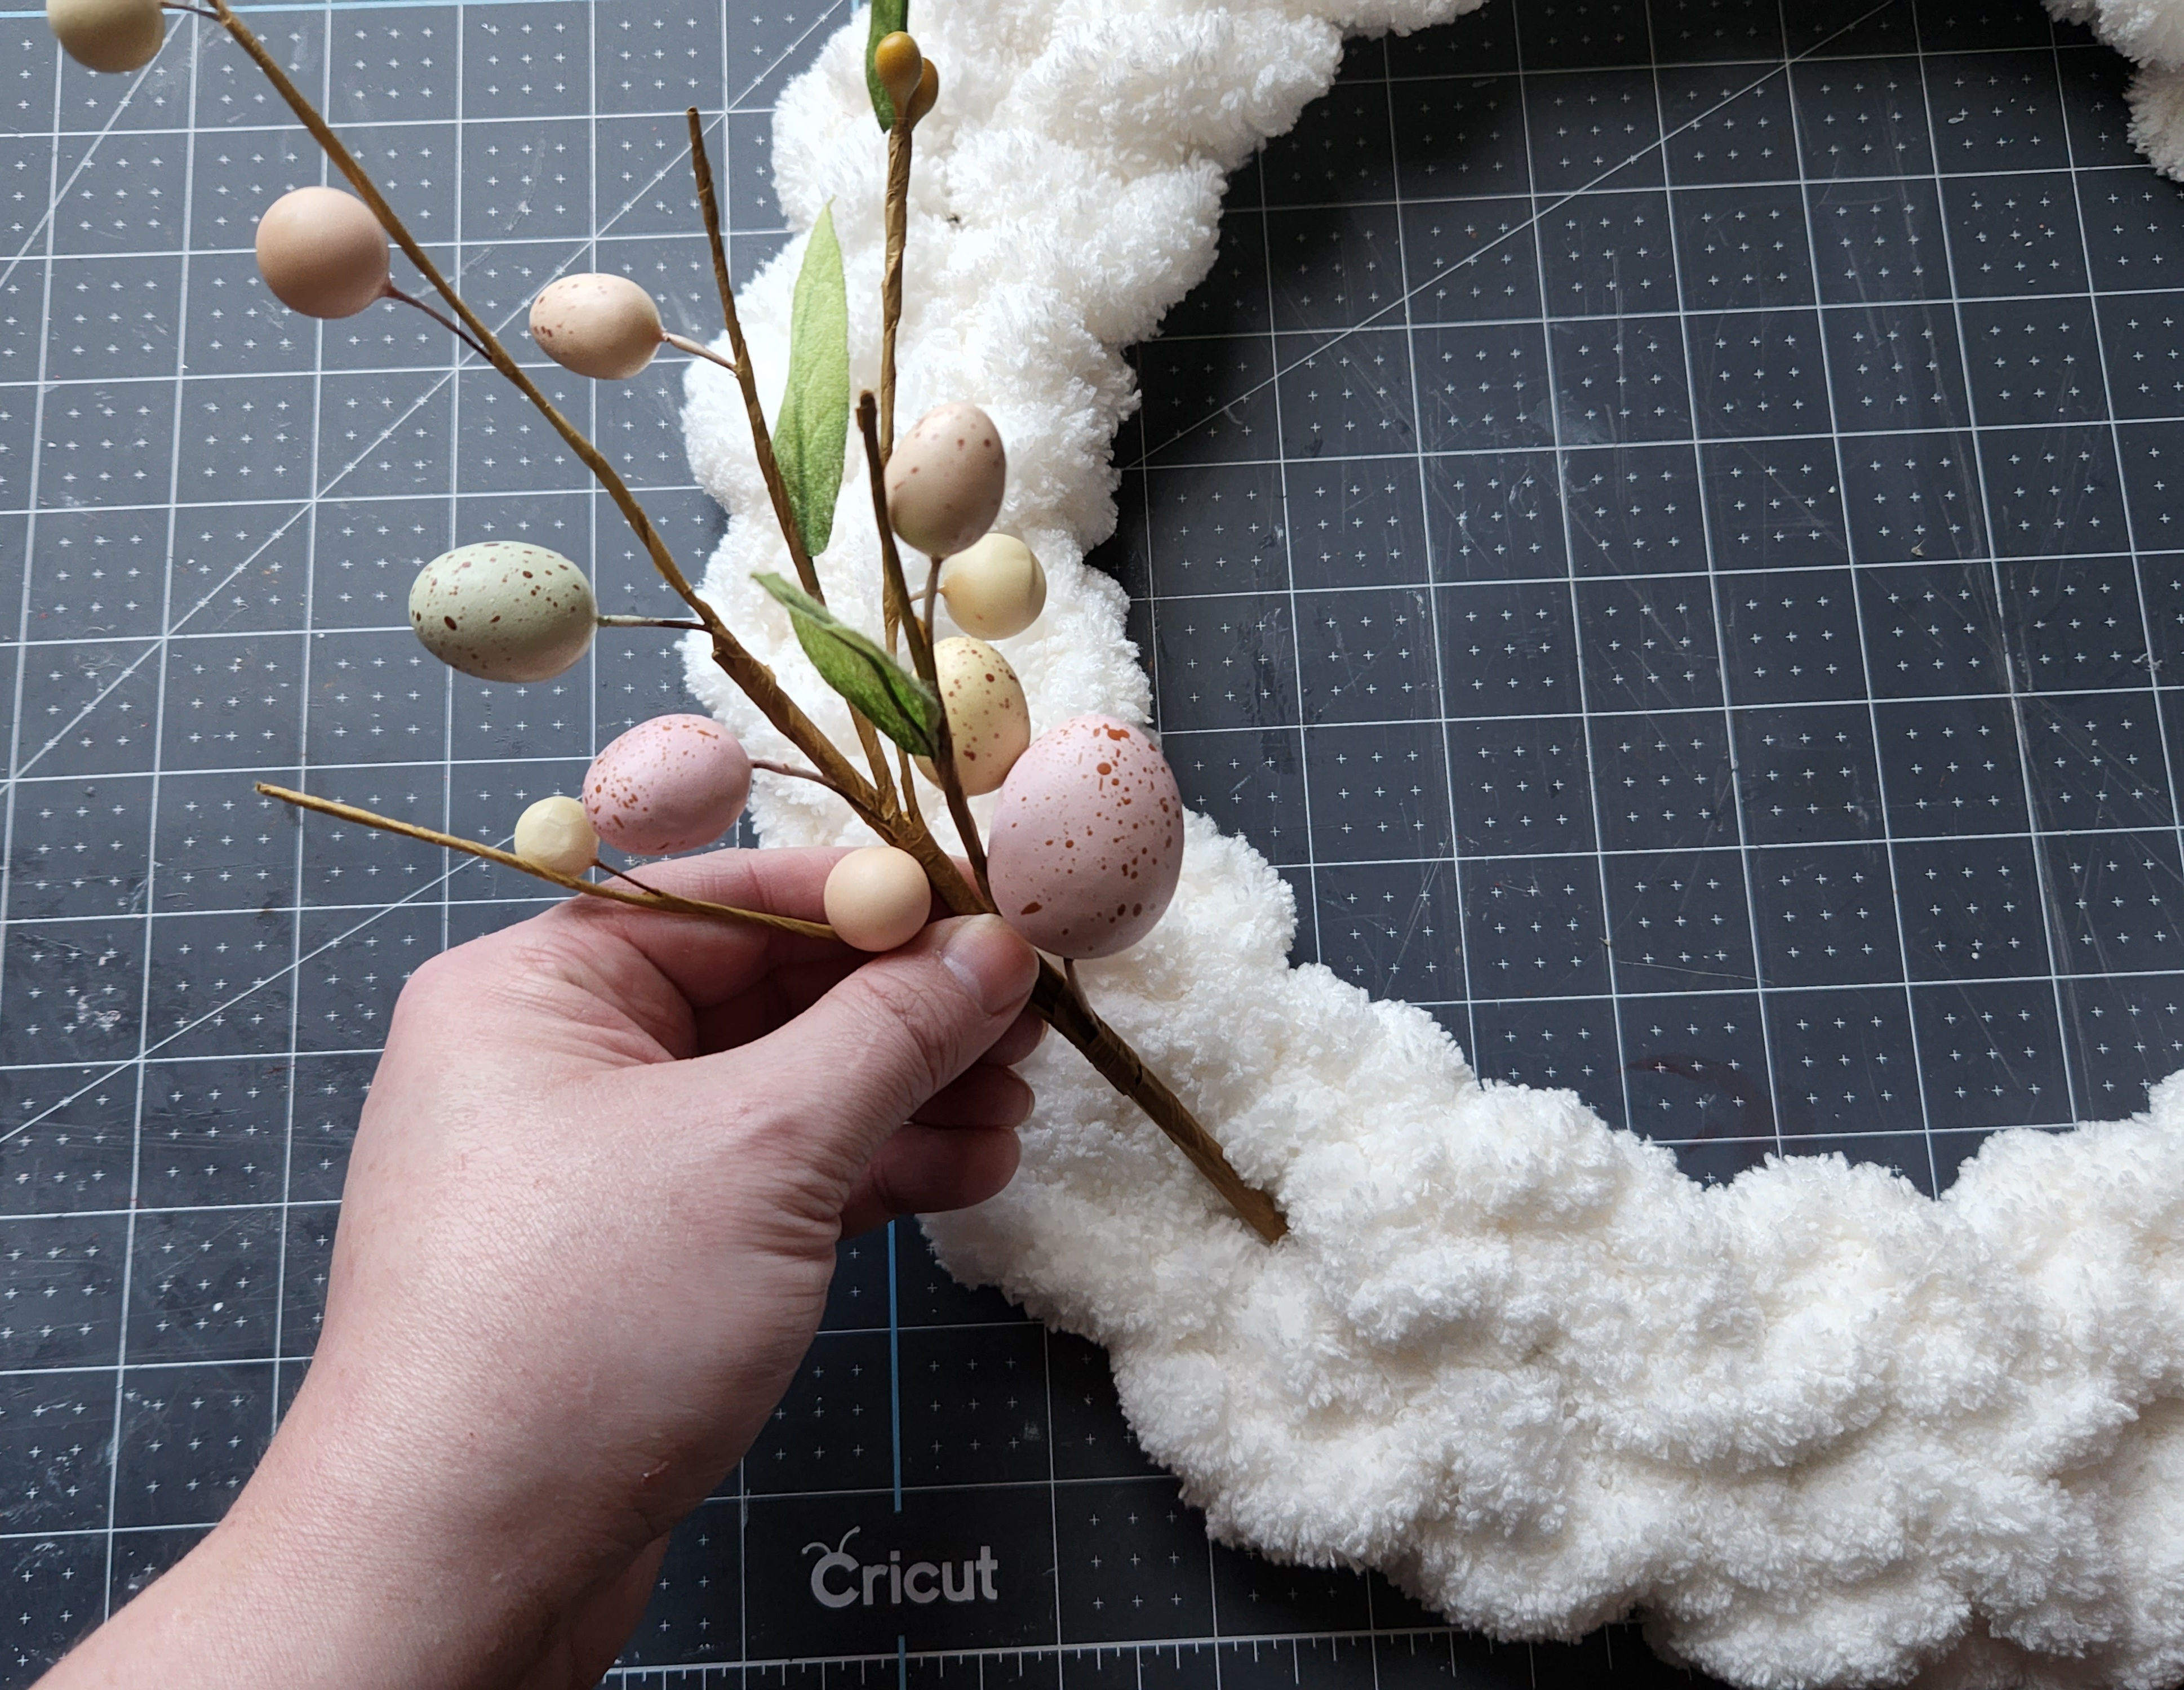 Placing a speckled egg pick into the braided chunky yarn wreath.